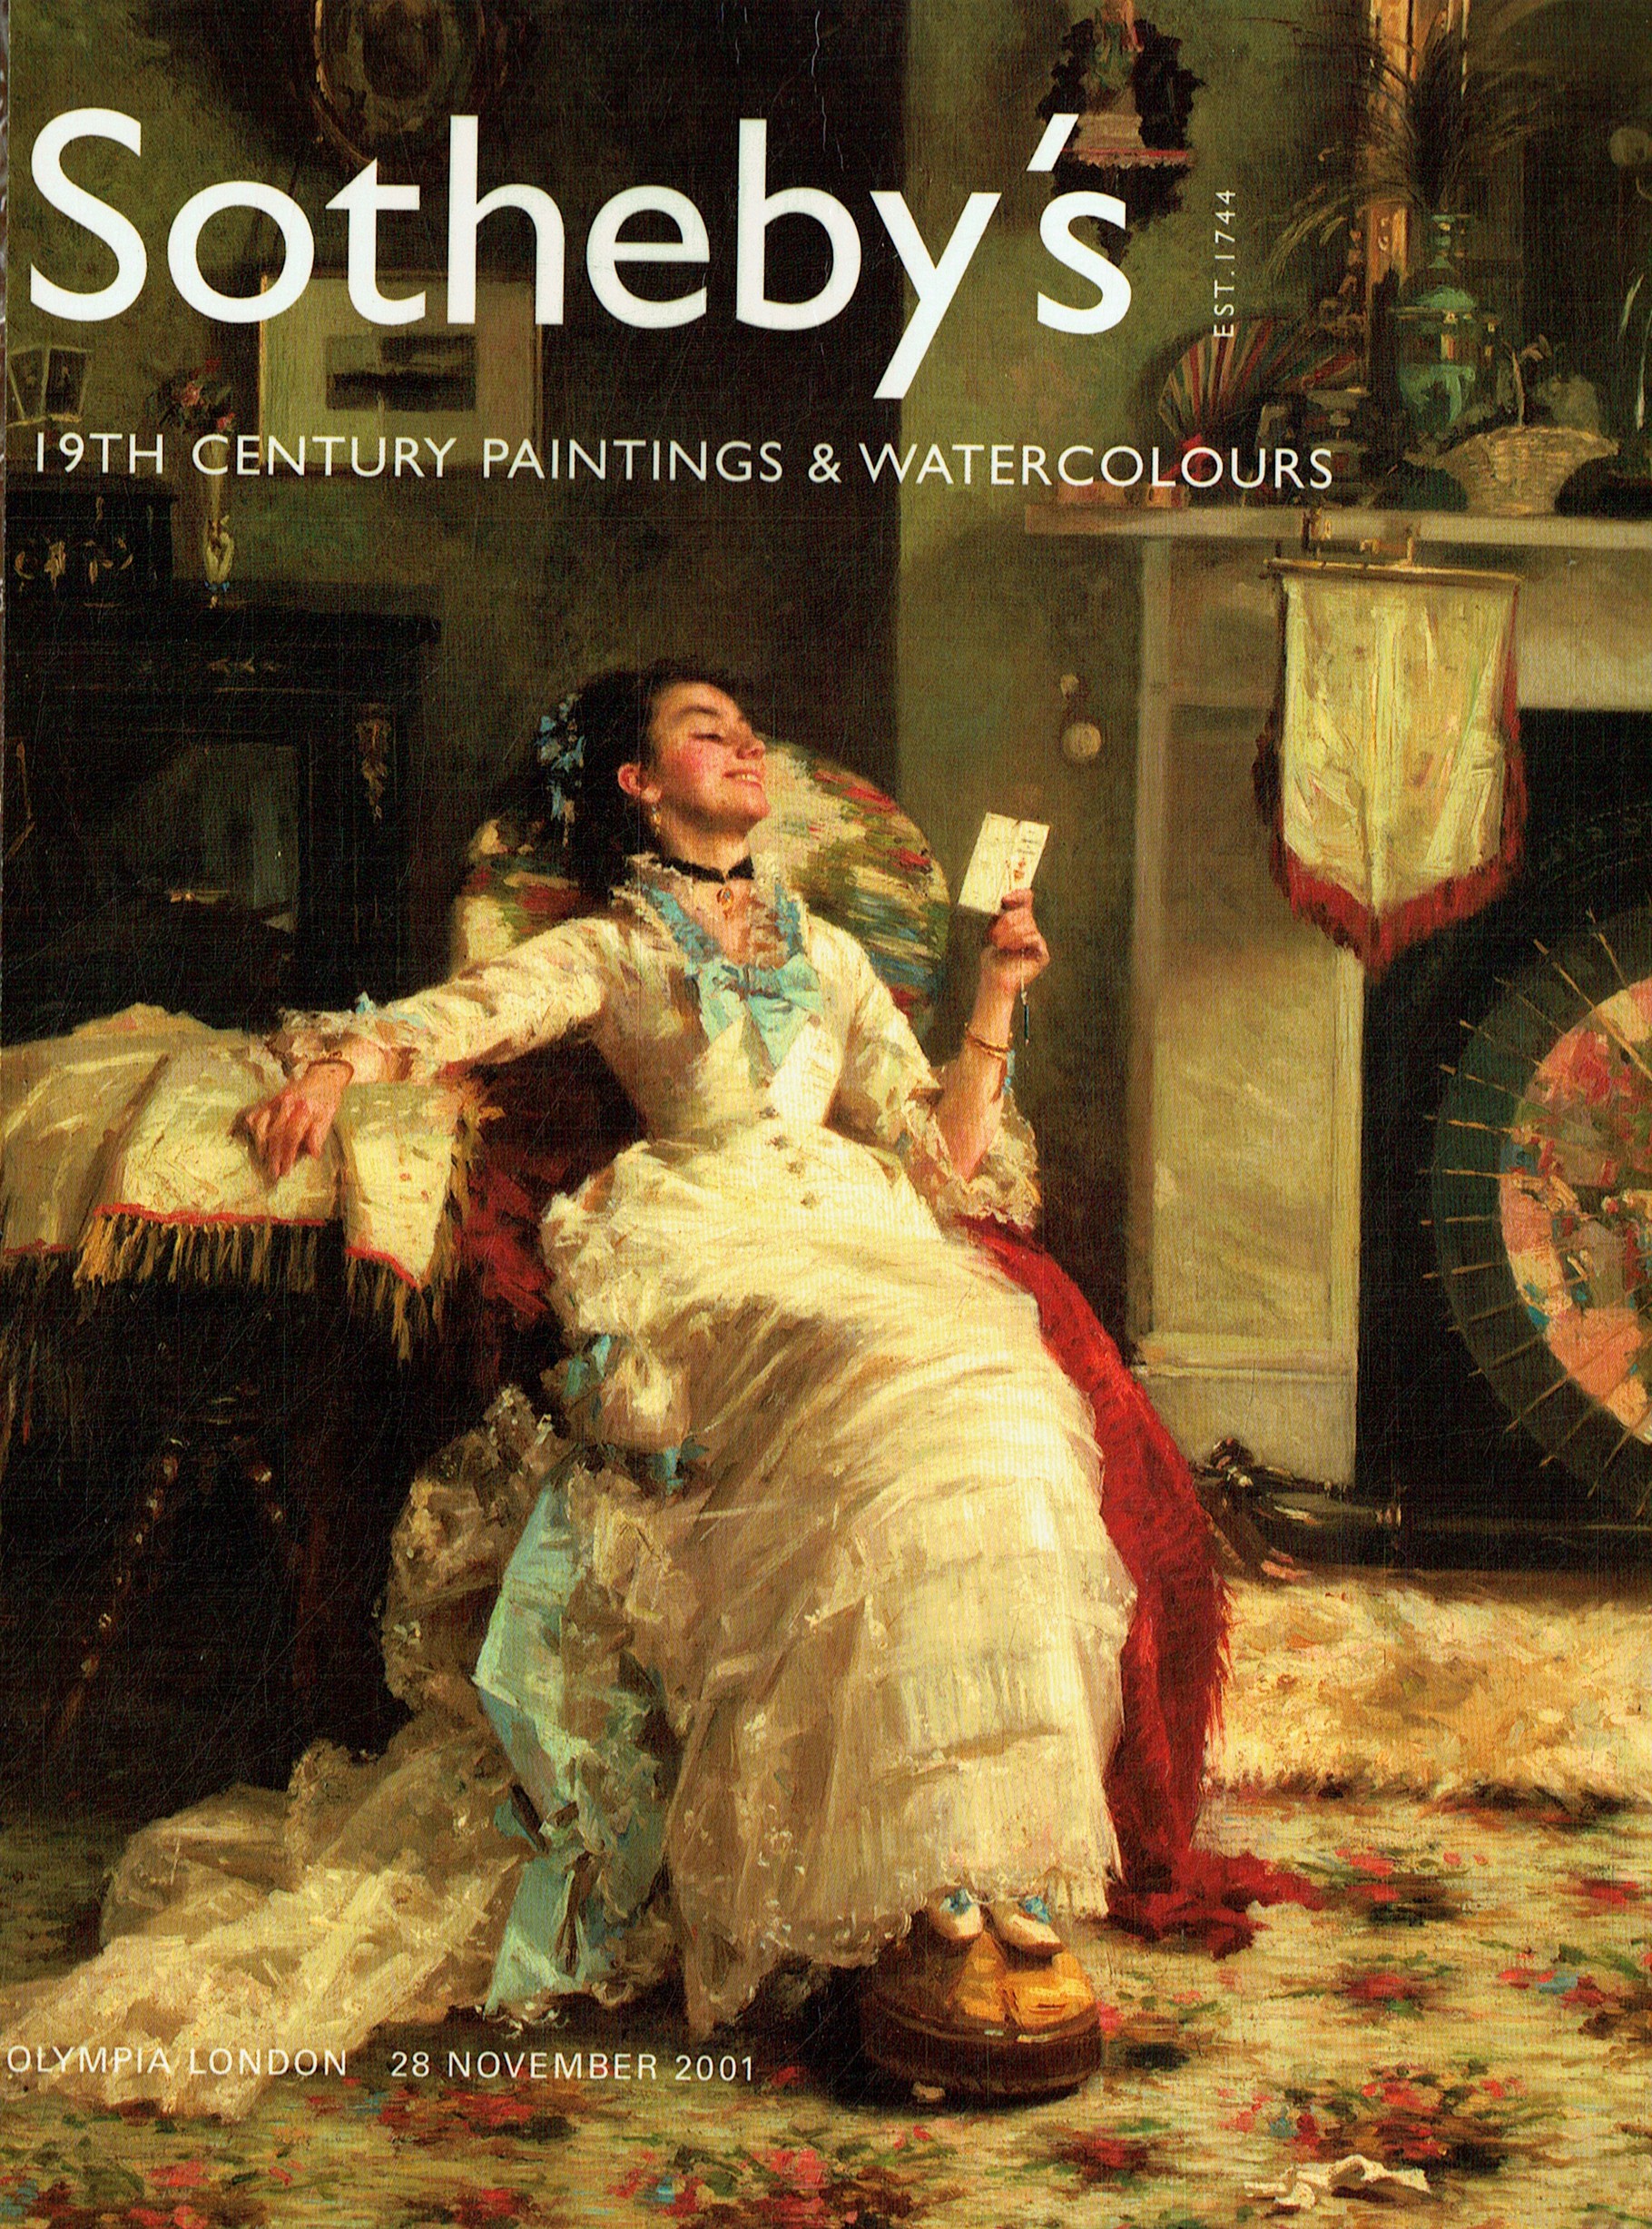 Sothebys November 2001 19th Century Paintings & Watercolours (Digital Only)